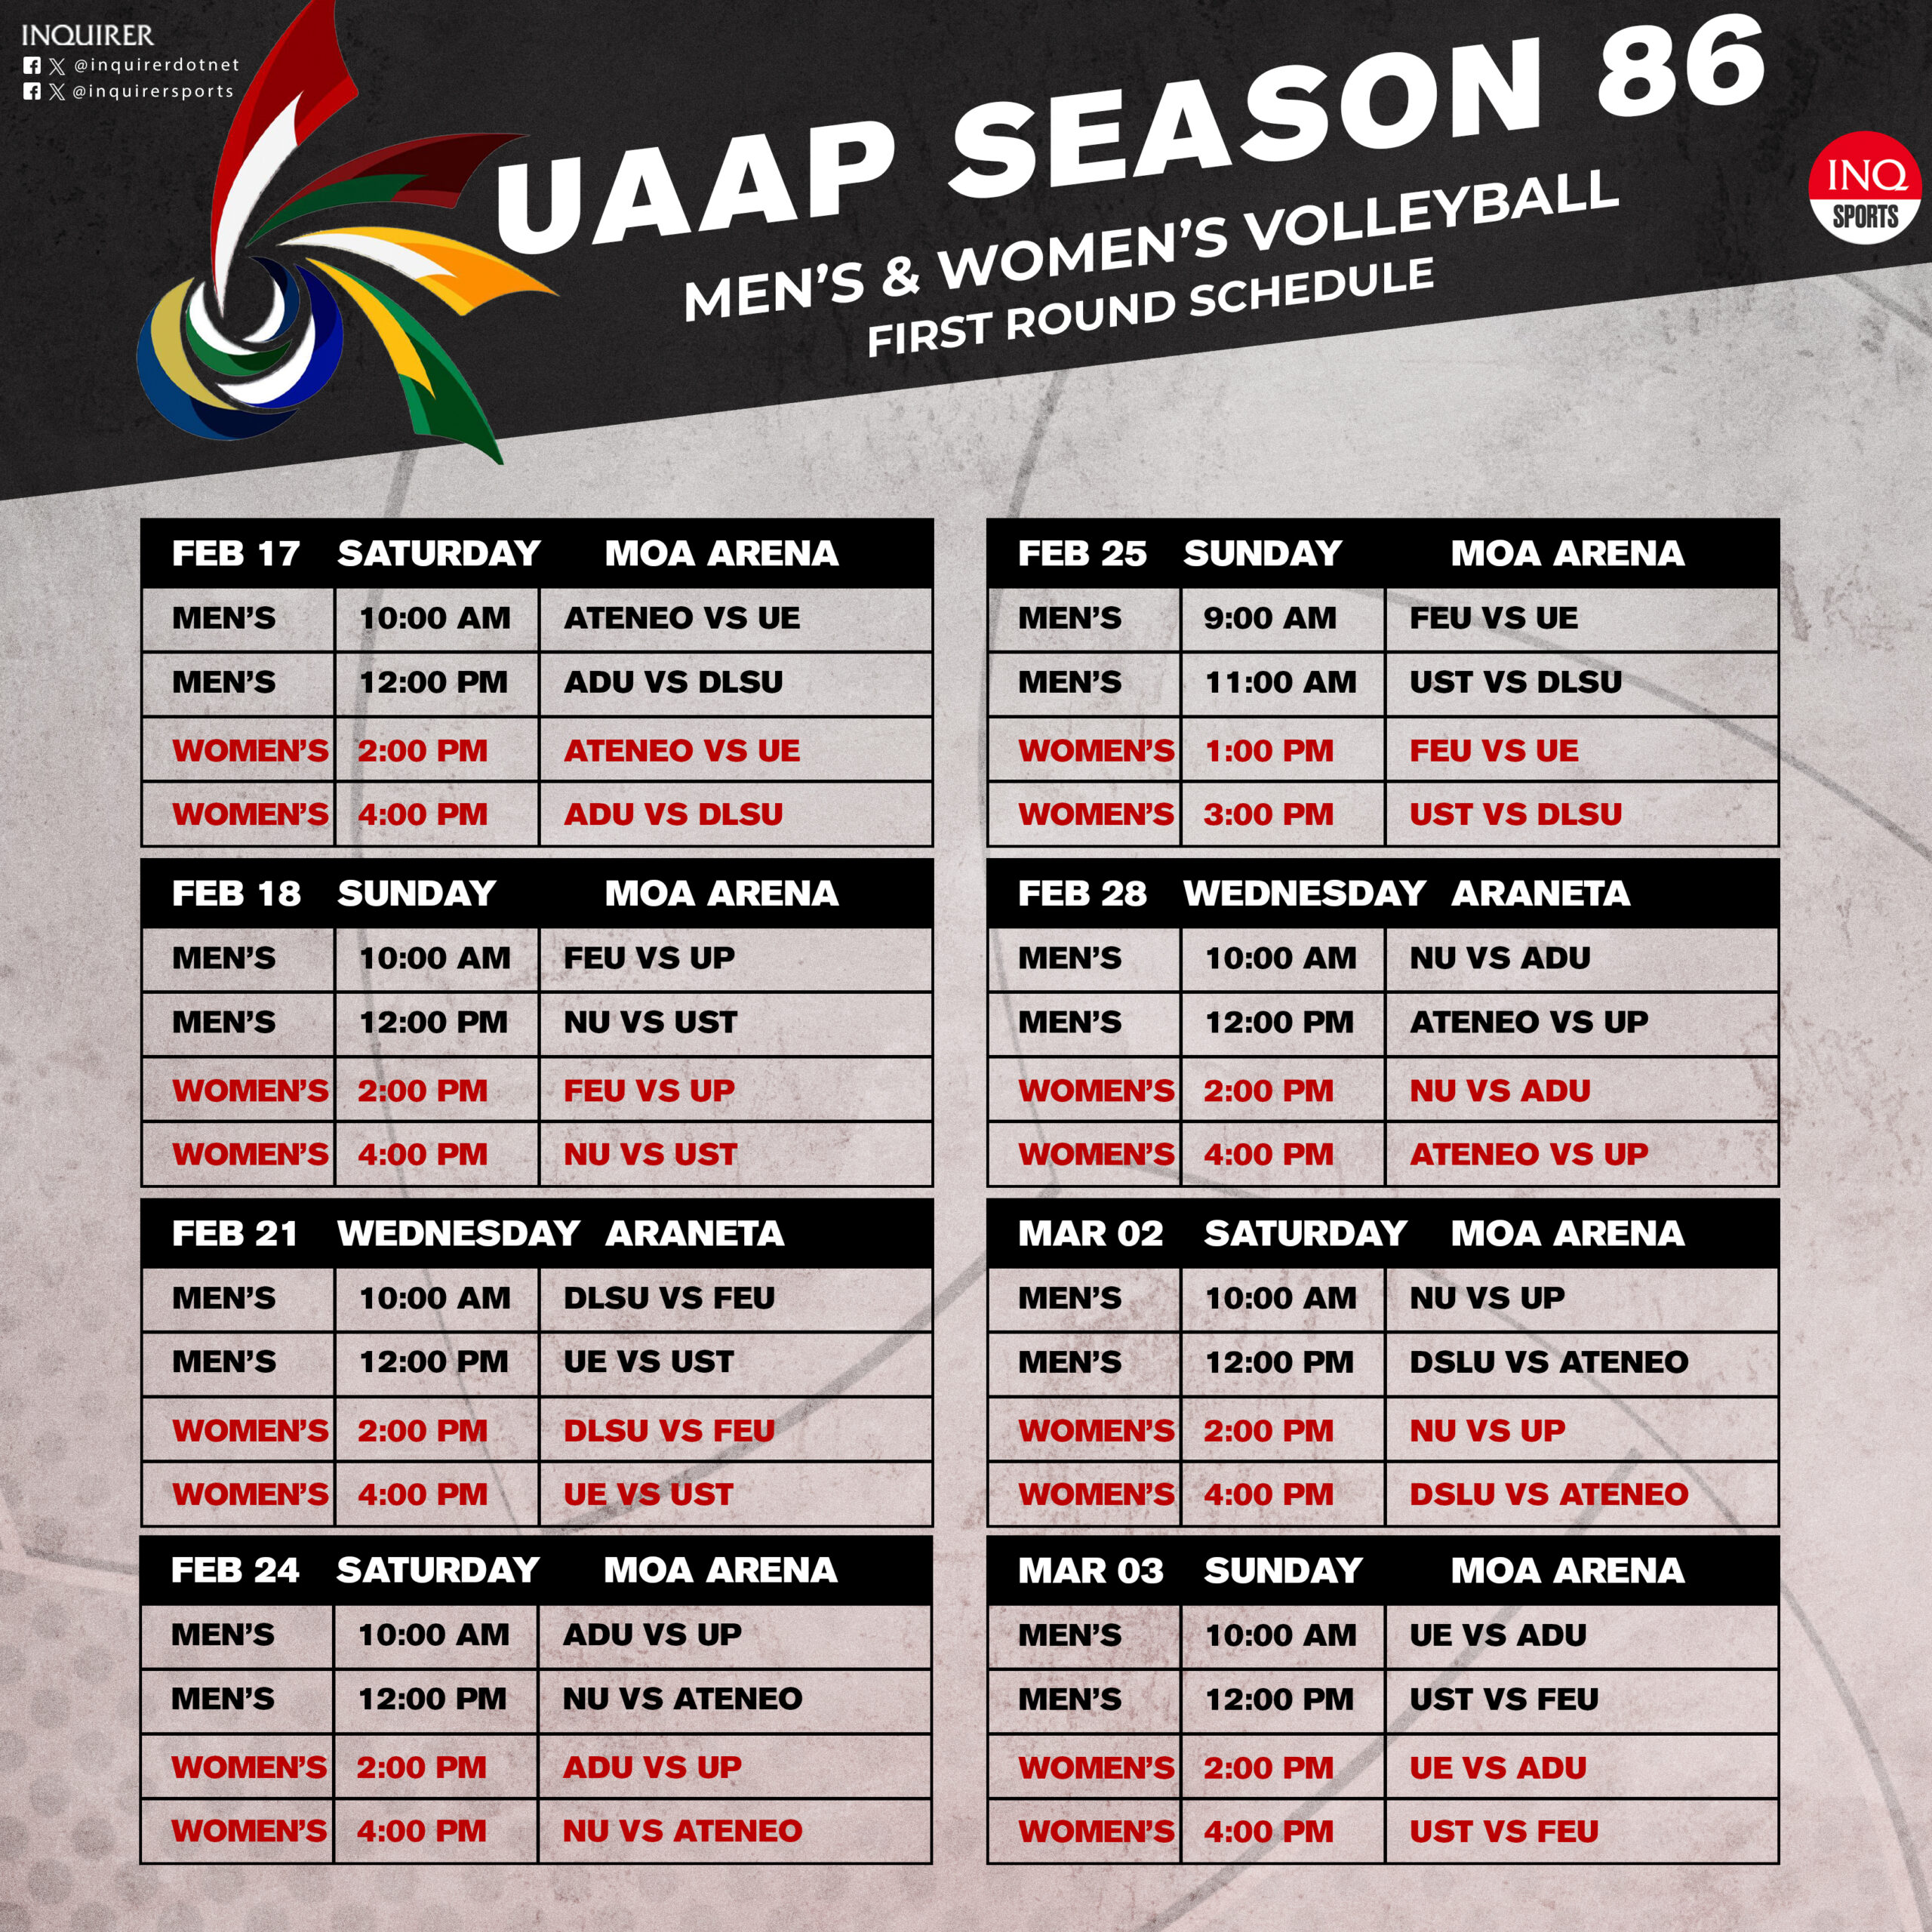 UAAP volleyball schedule UAAP Season 86 first round